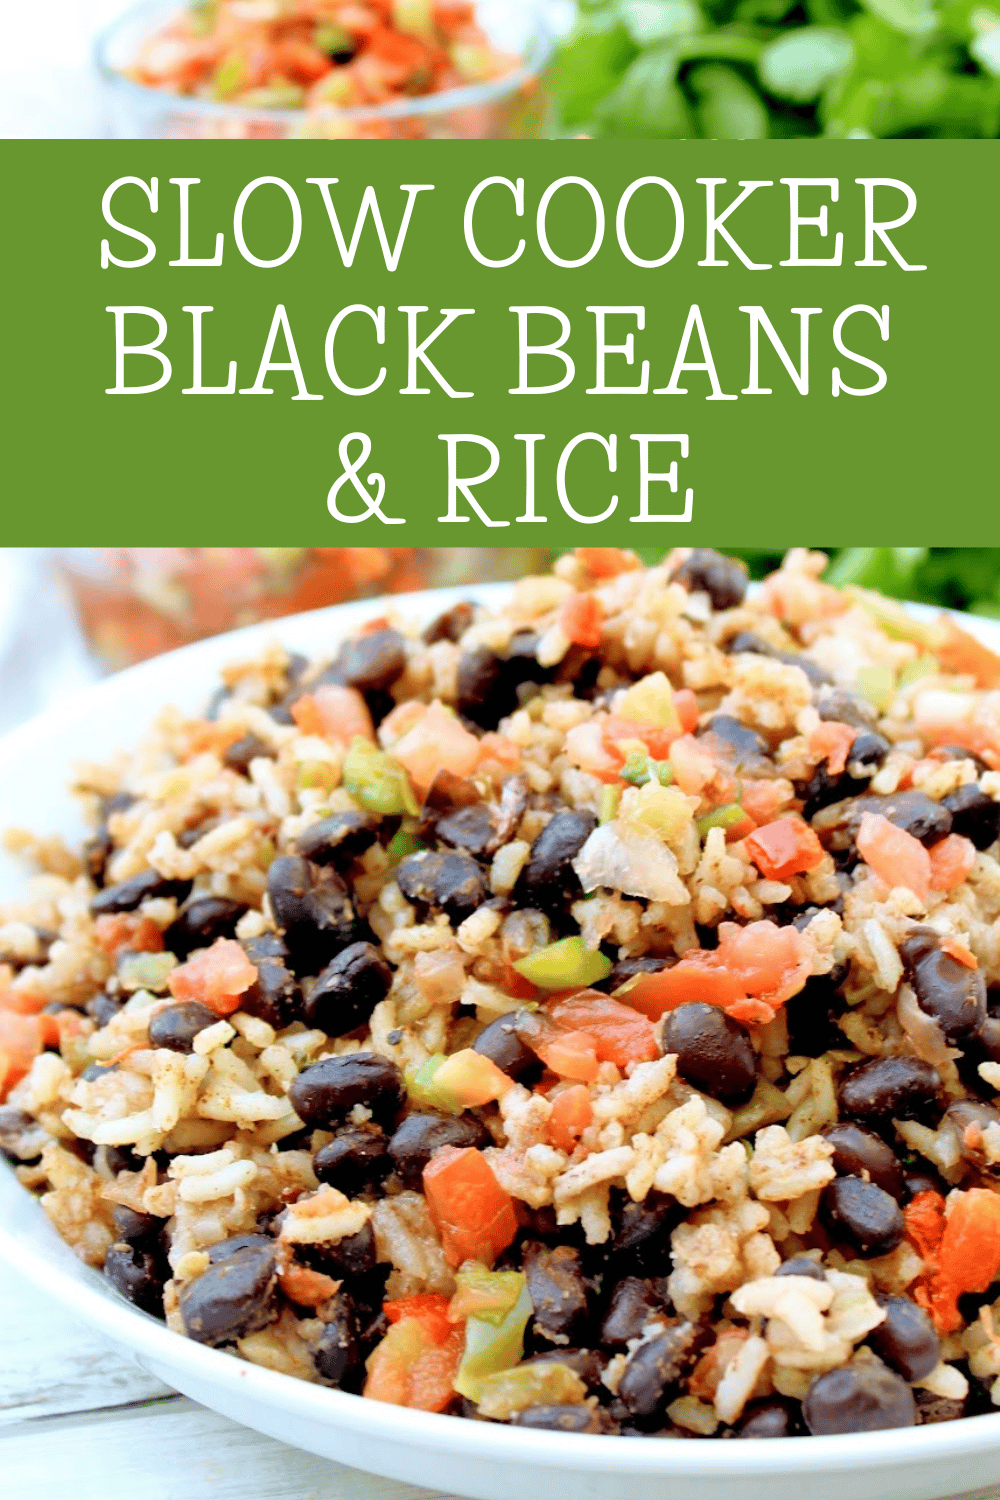 Slow Cooker Black Beans and Rice ~ This crock pot meal is easy, flavorful, and budget-friendly!  via @thiswifecooks